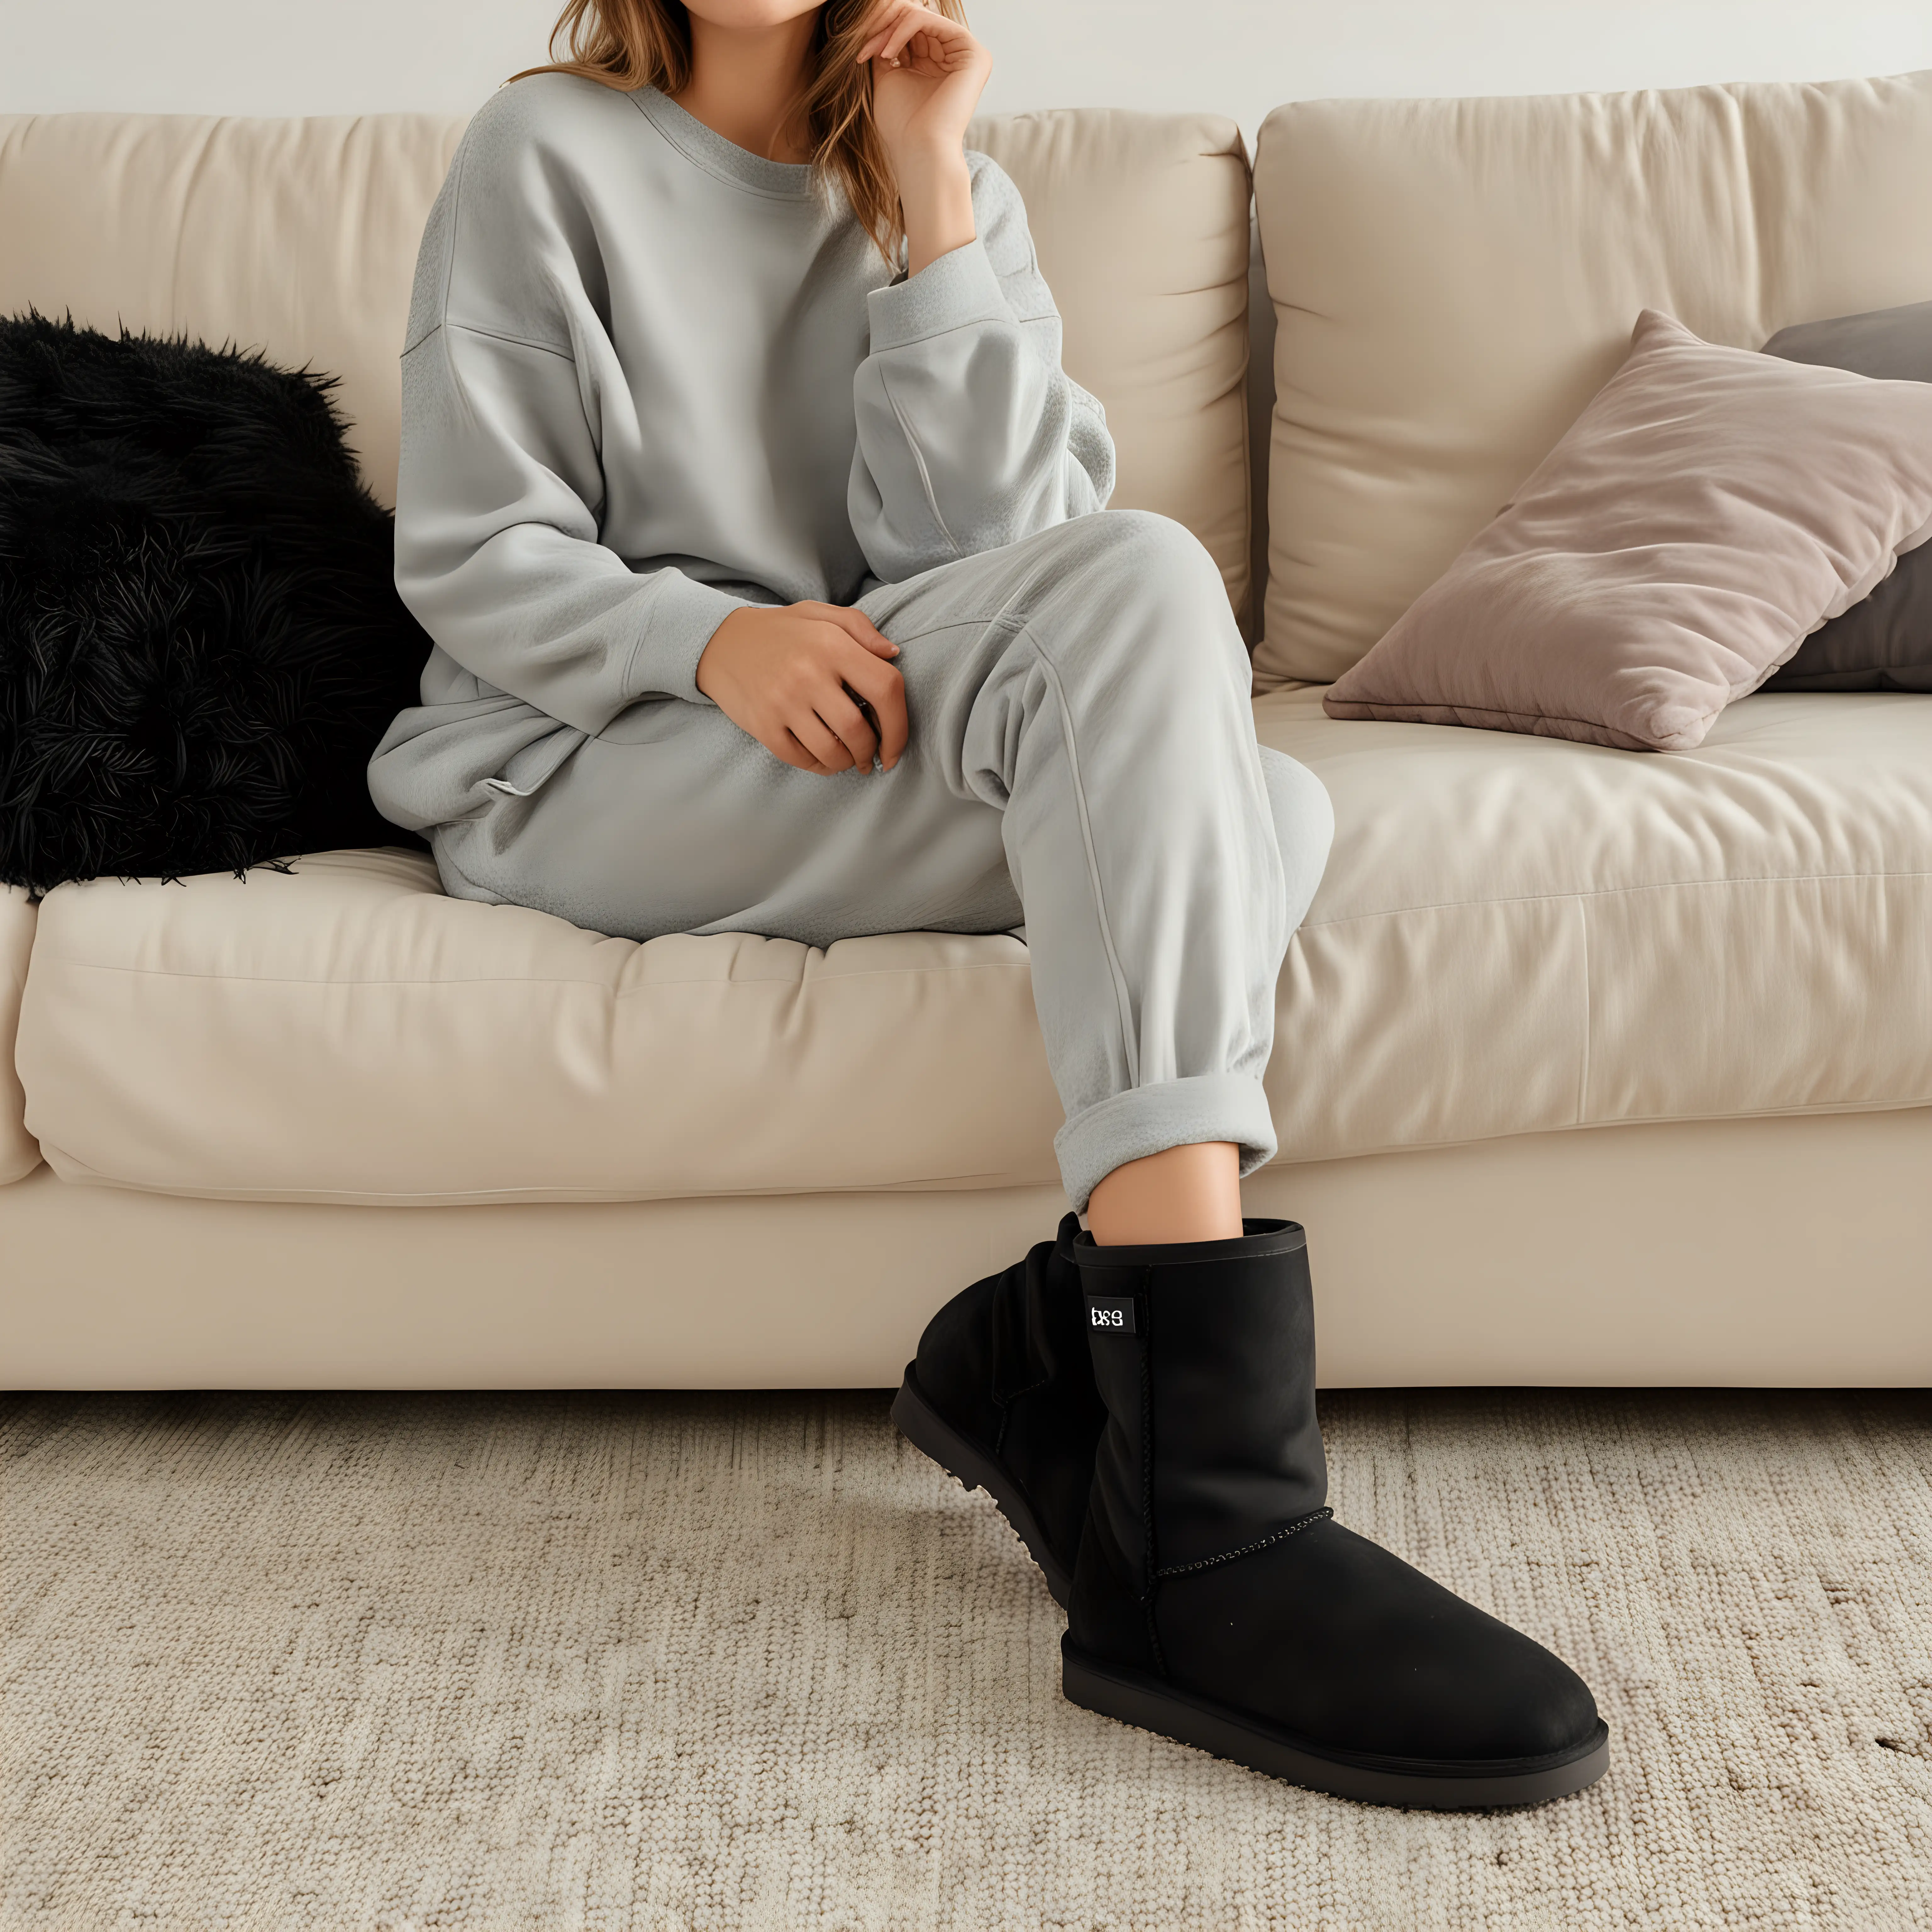 Cozy Home Relaxation Person Lounging on Sofa in Emu Australia Black Ugg Boots